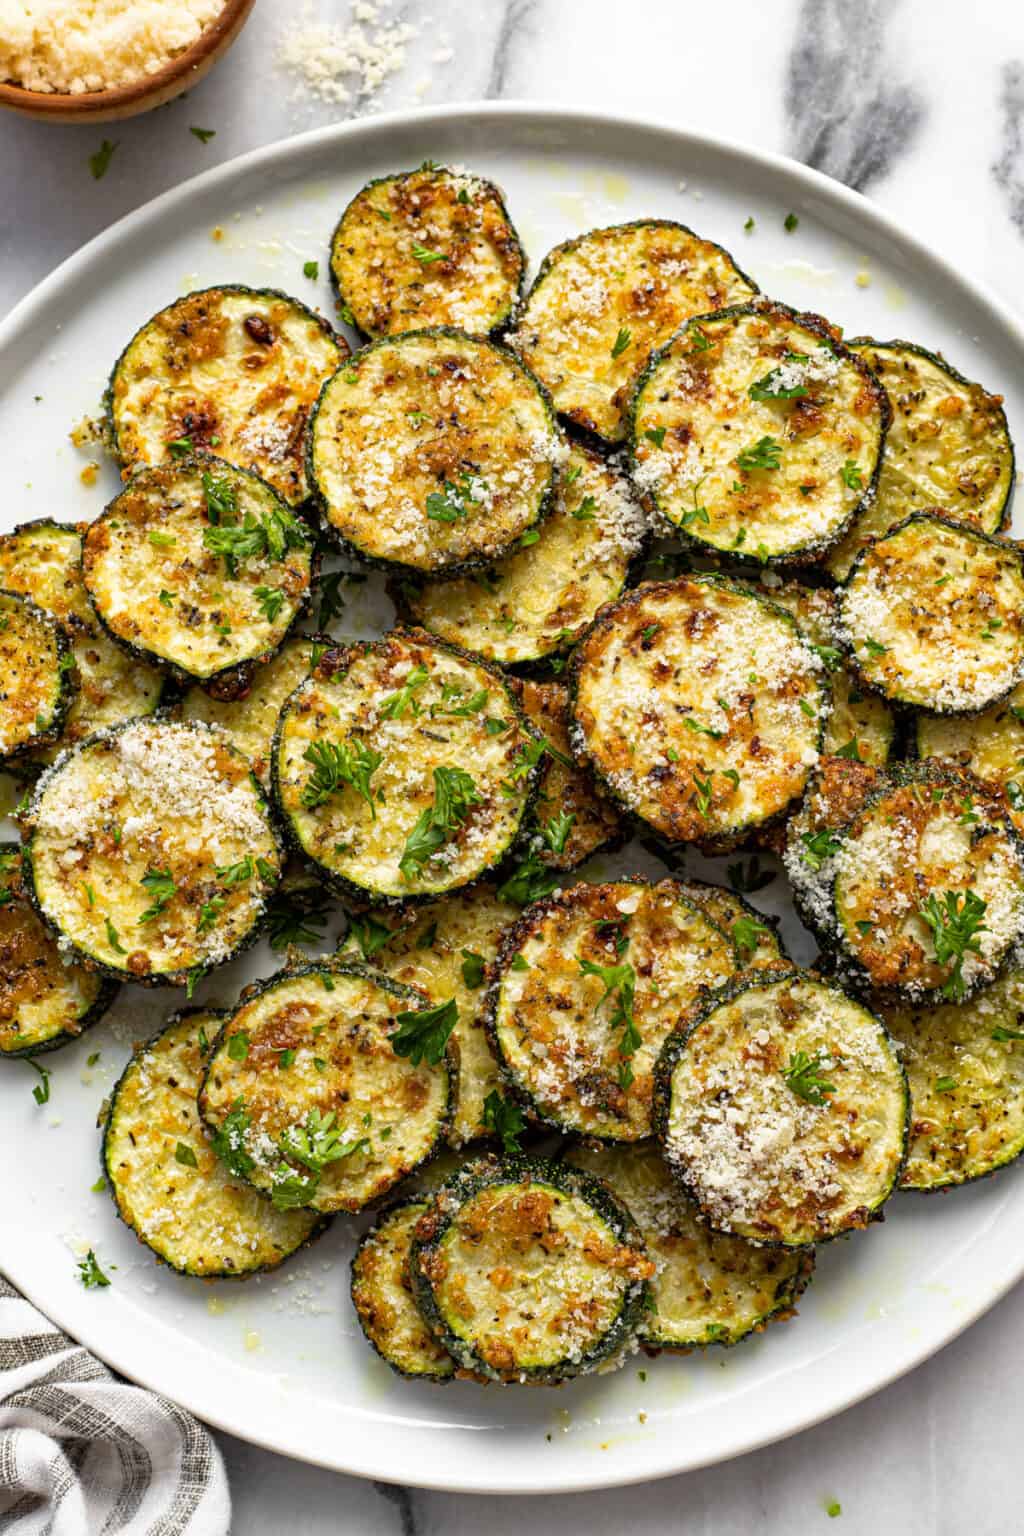 10 Minute Air Fryer Zucchini - Midwest Foodie